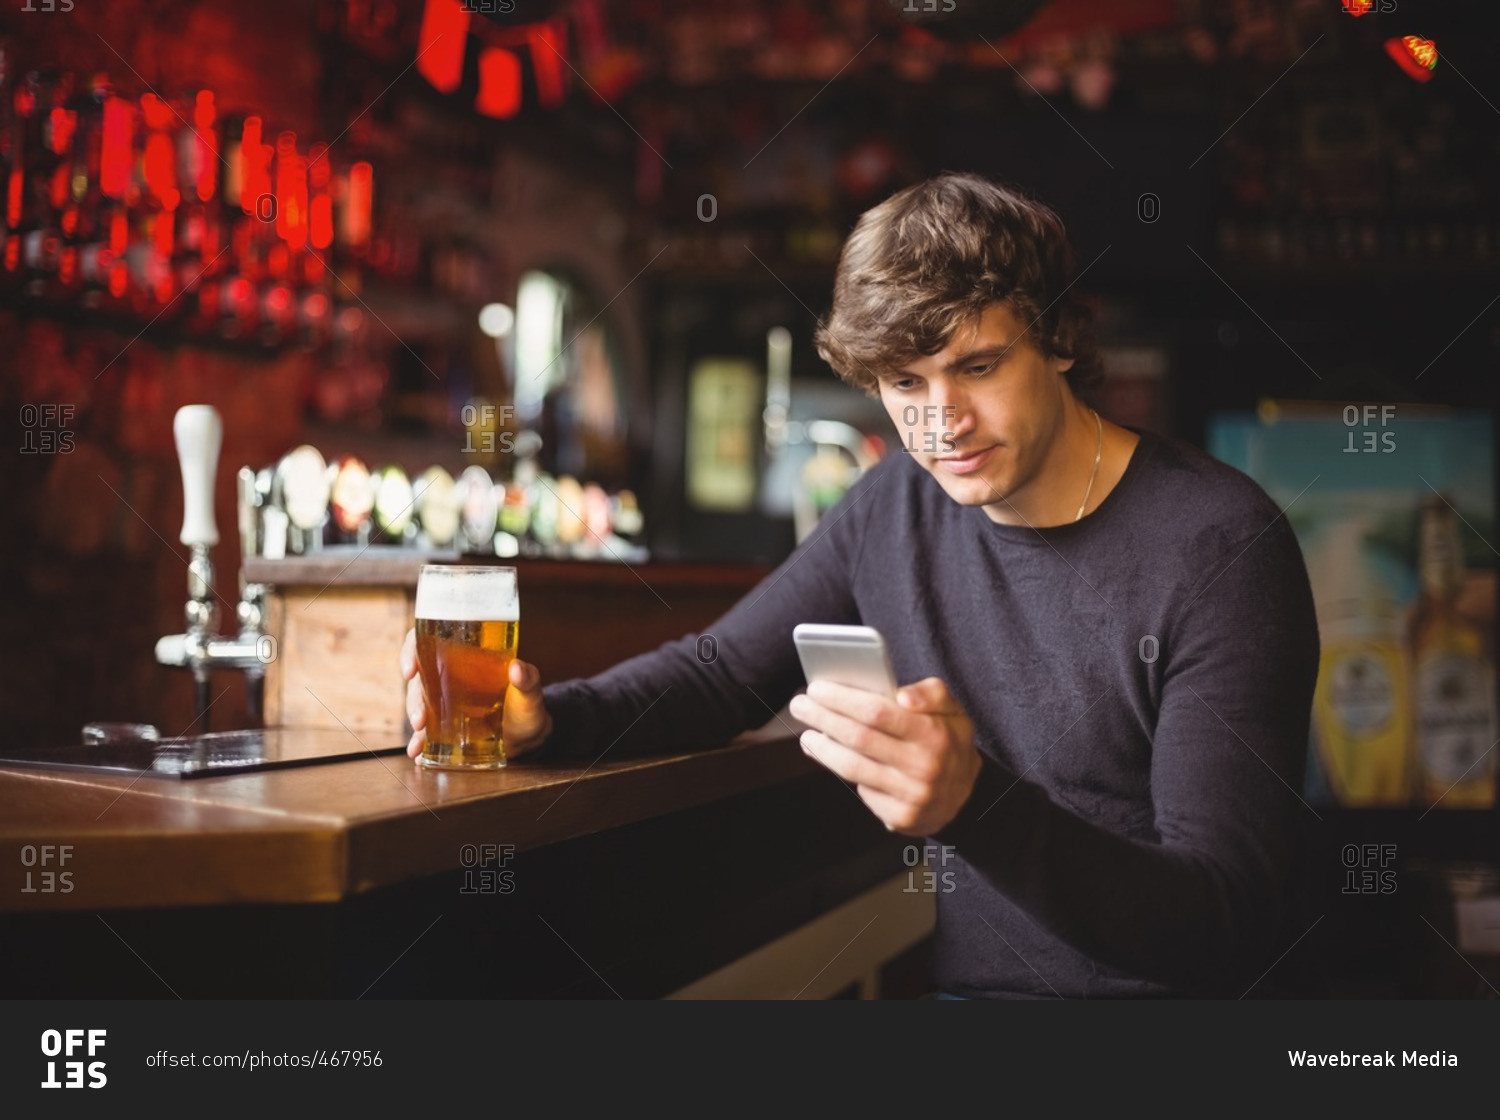 Man using mobile phone with glass of beer in hand at bar